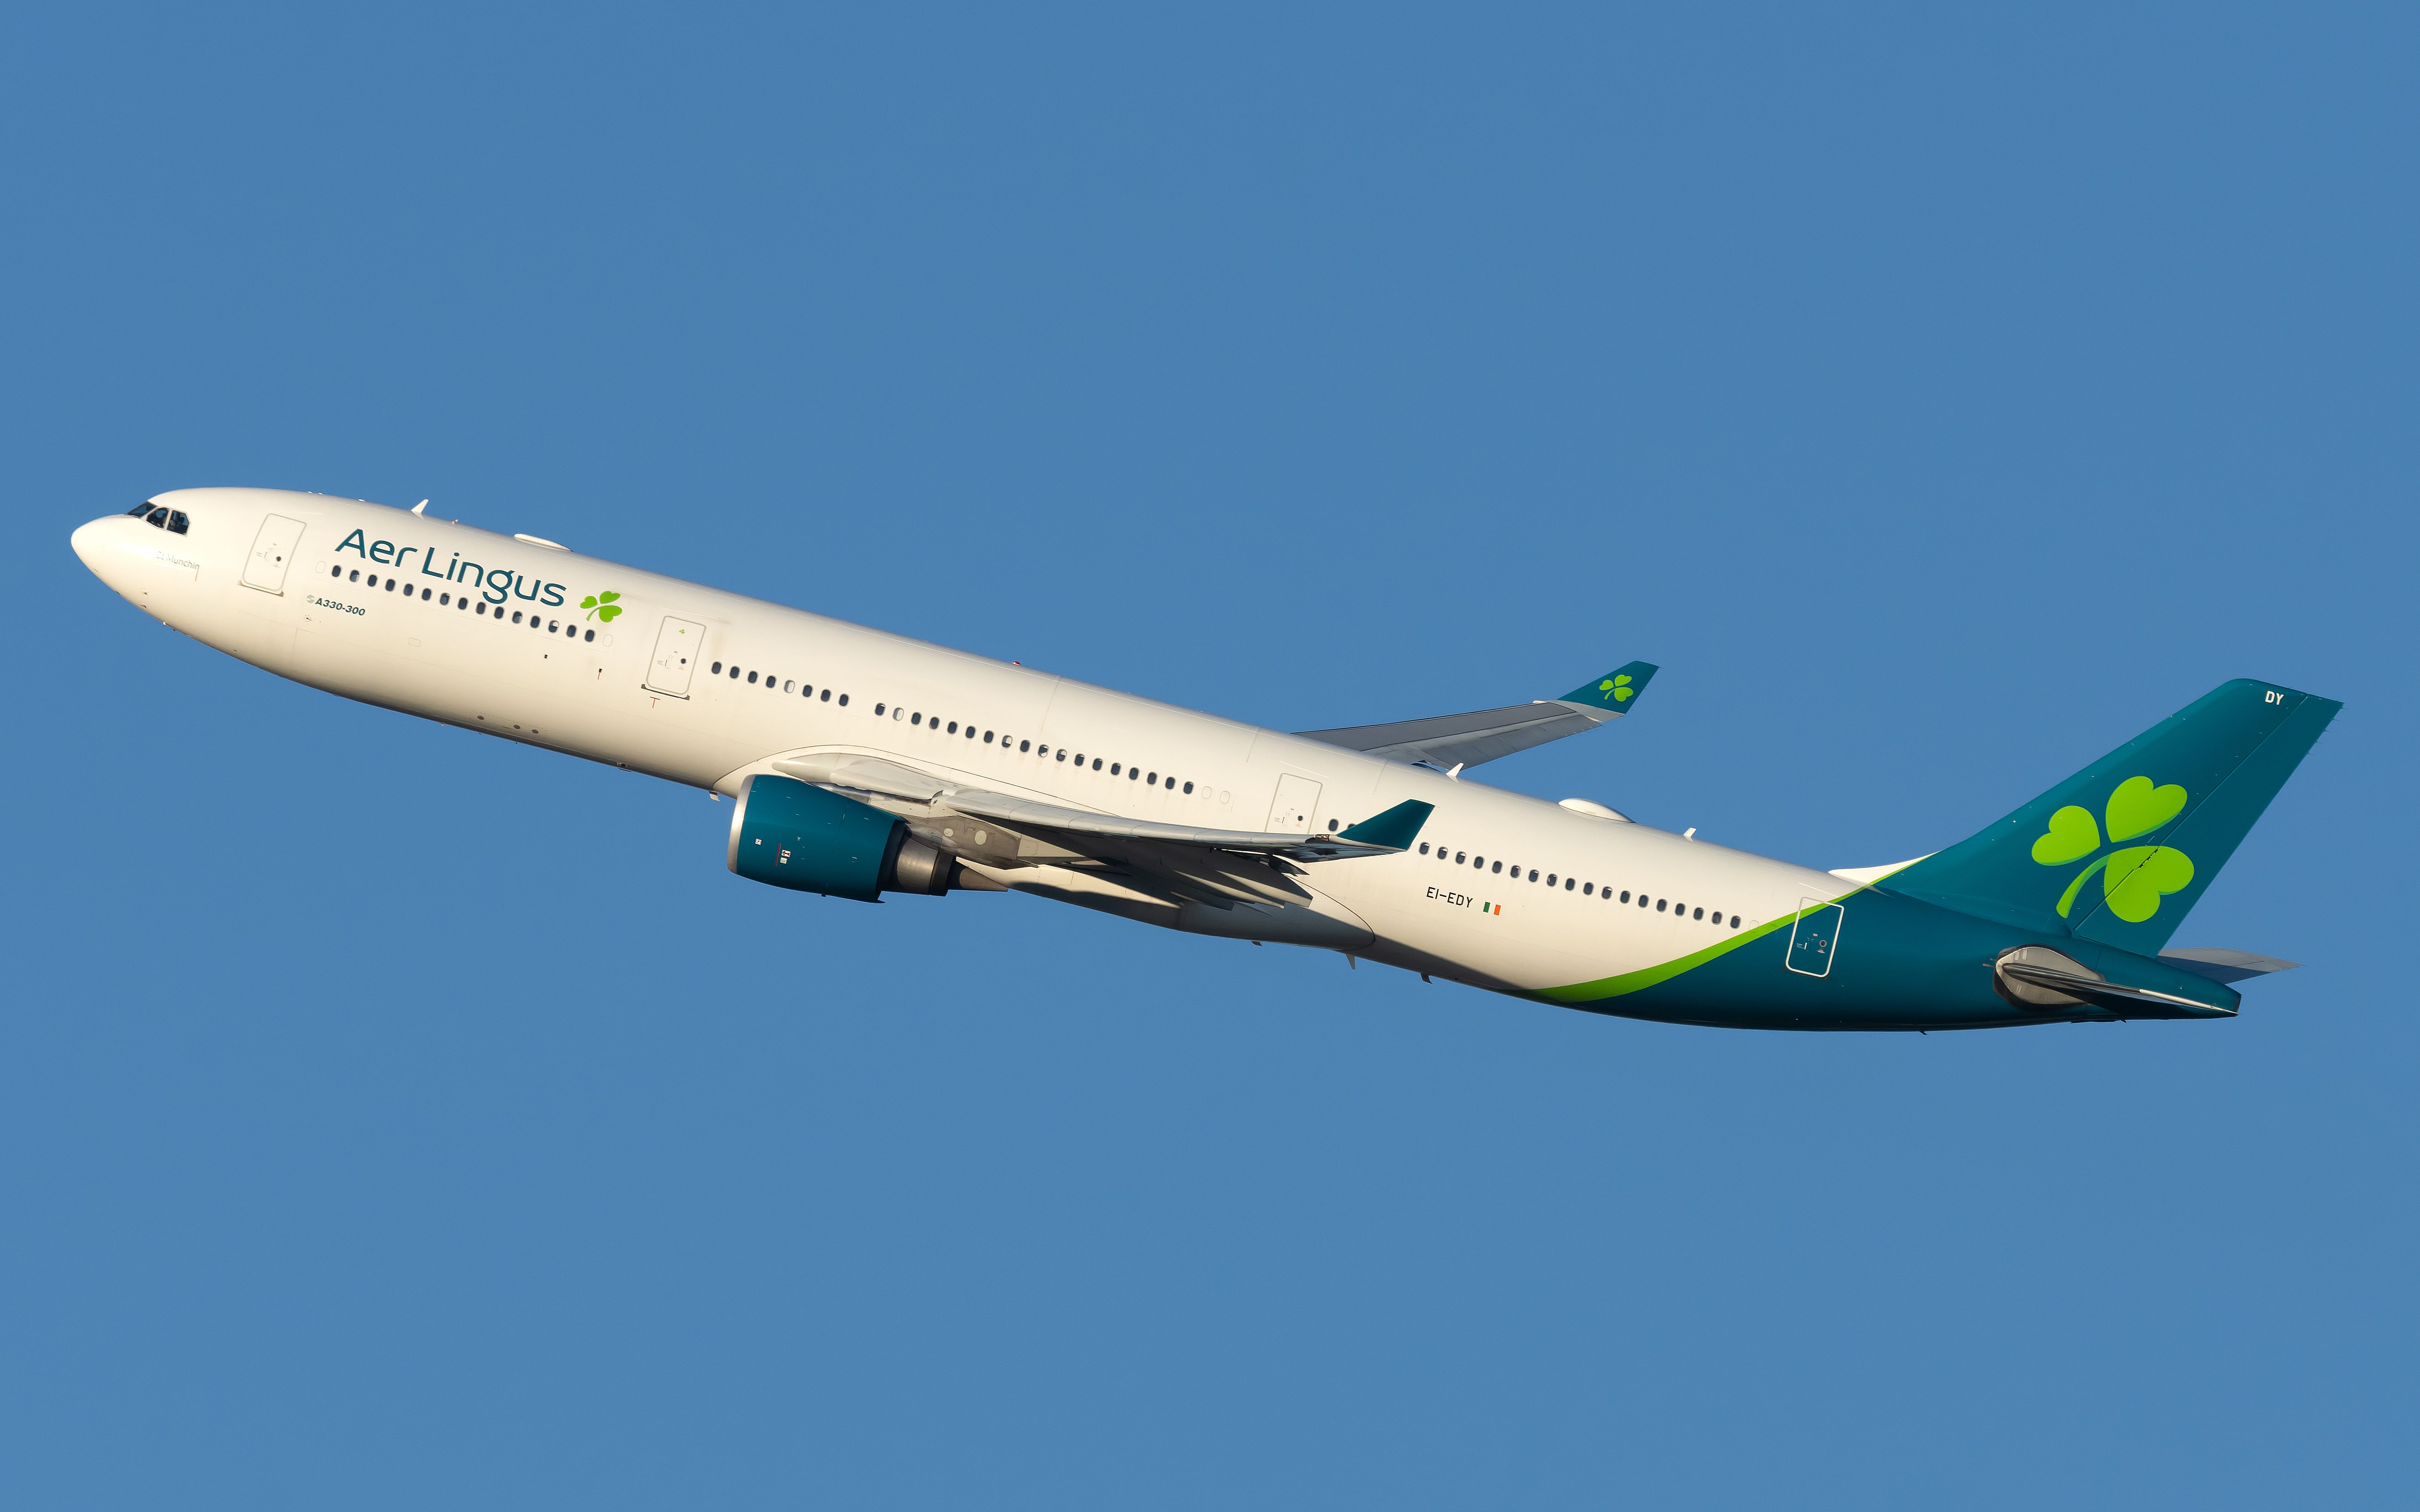 An Aer Lingus Airbus A330-300 flying in the sky.